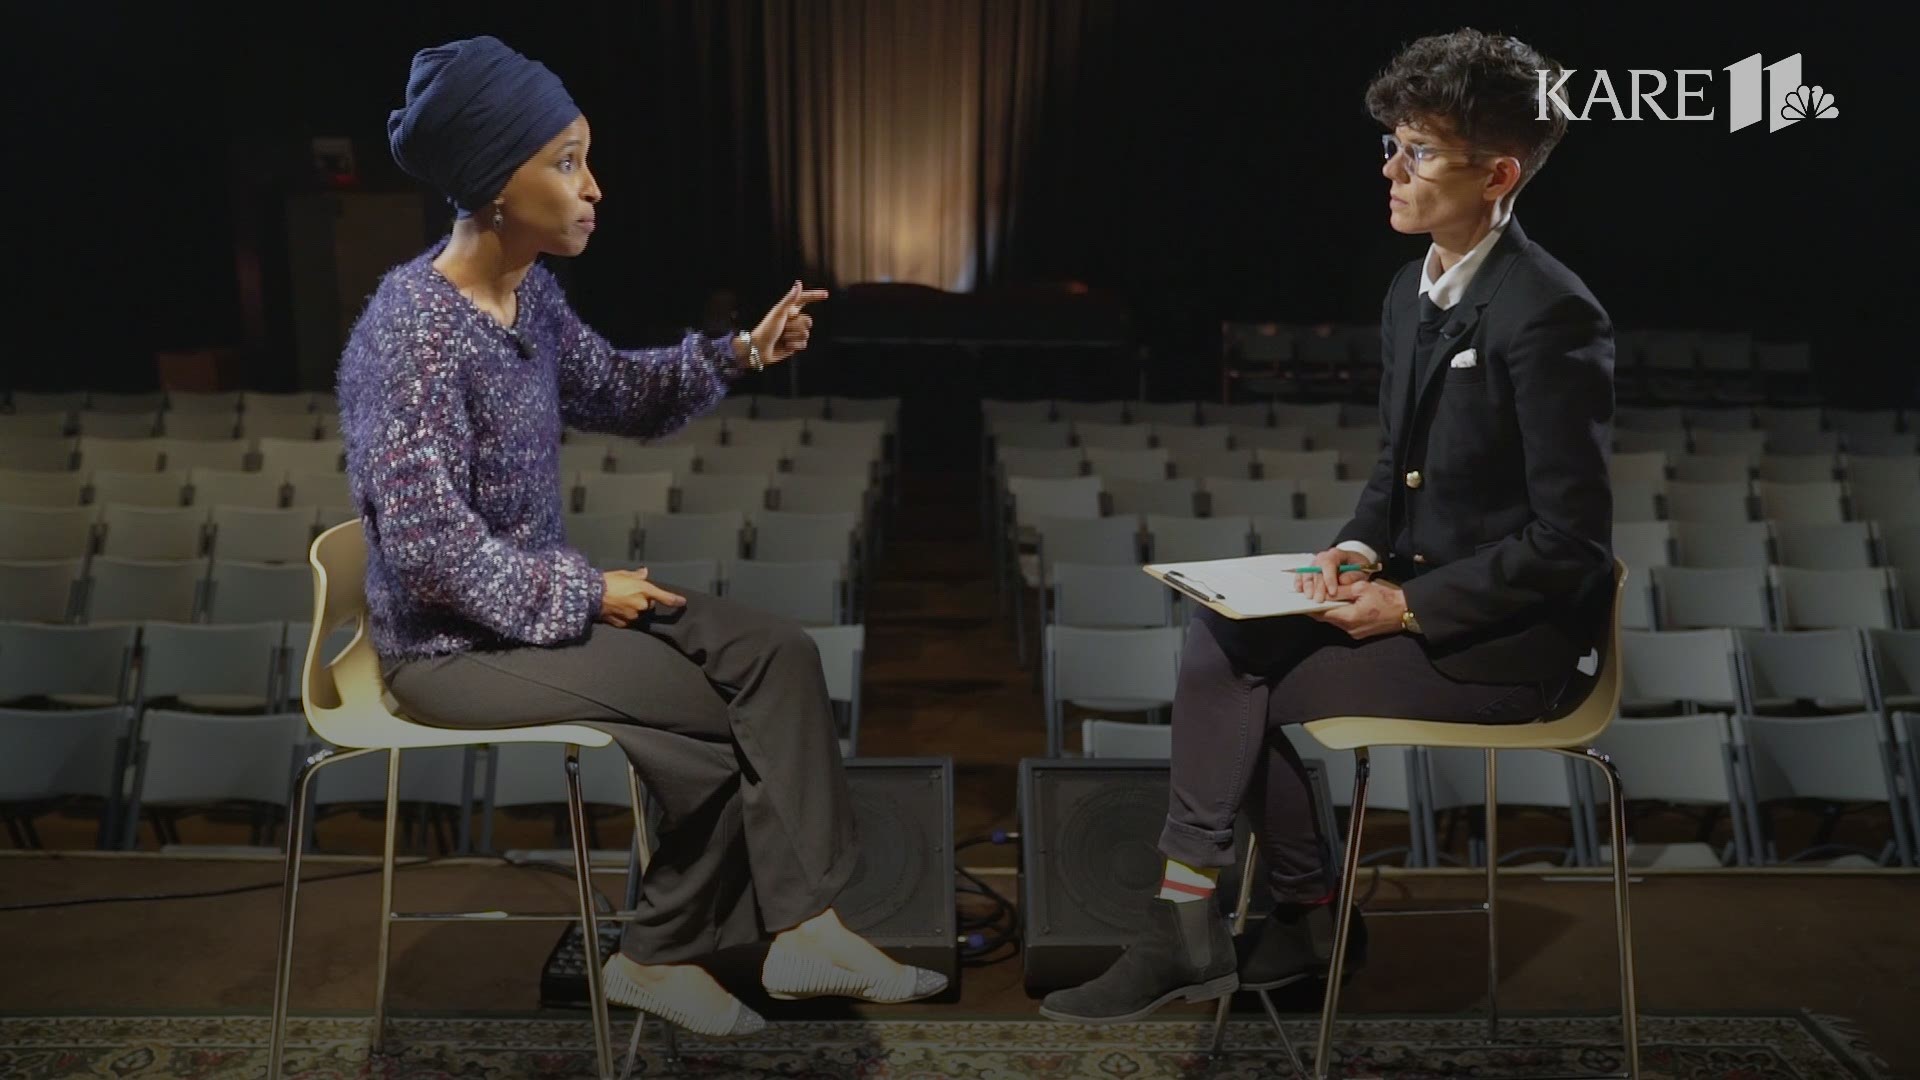 MN congresswoman Ilhan Omar sat down for a one-on-one interview with KARE 11's Jana Shortal on April 24, 2019. Rep. Omar talked about working alongside “sisters” Alexandra Ocasio-Cortez and Rashida Talib.